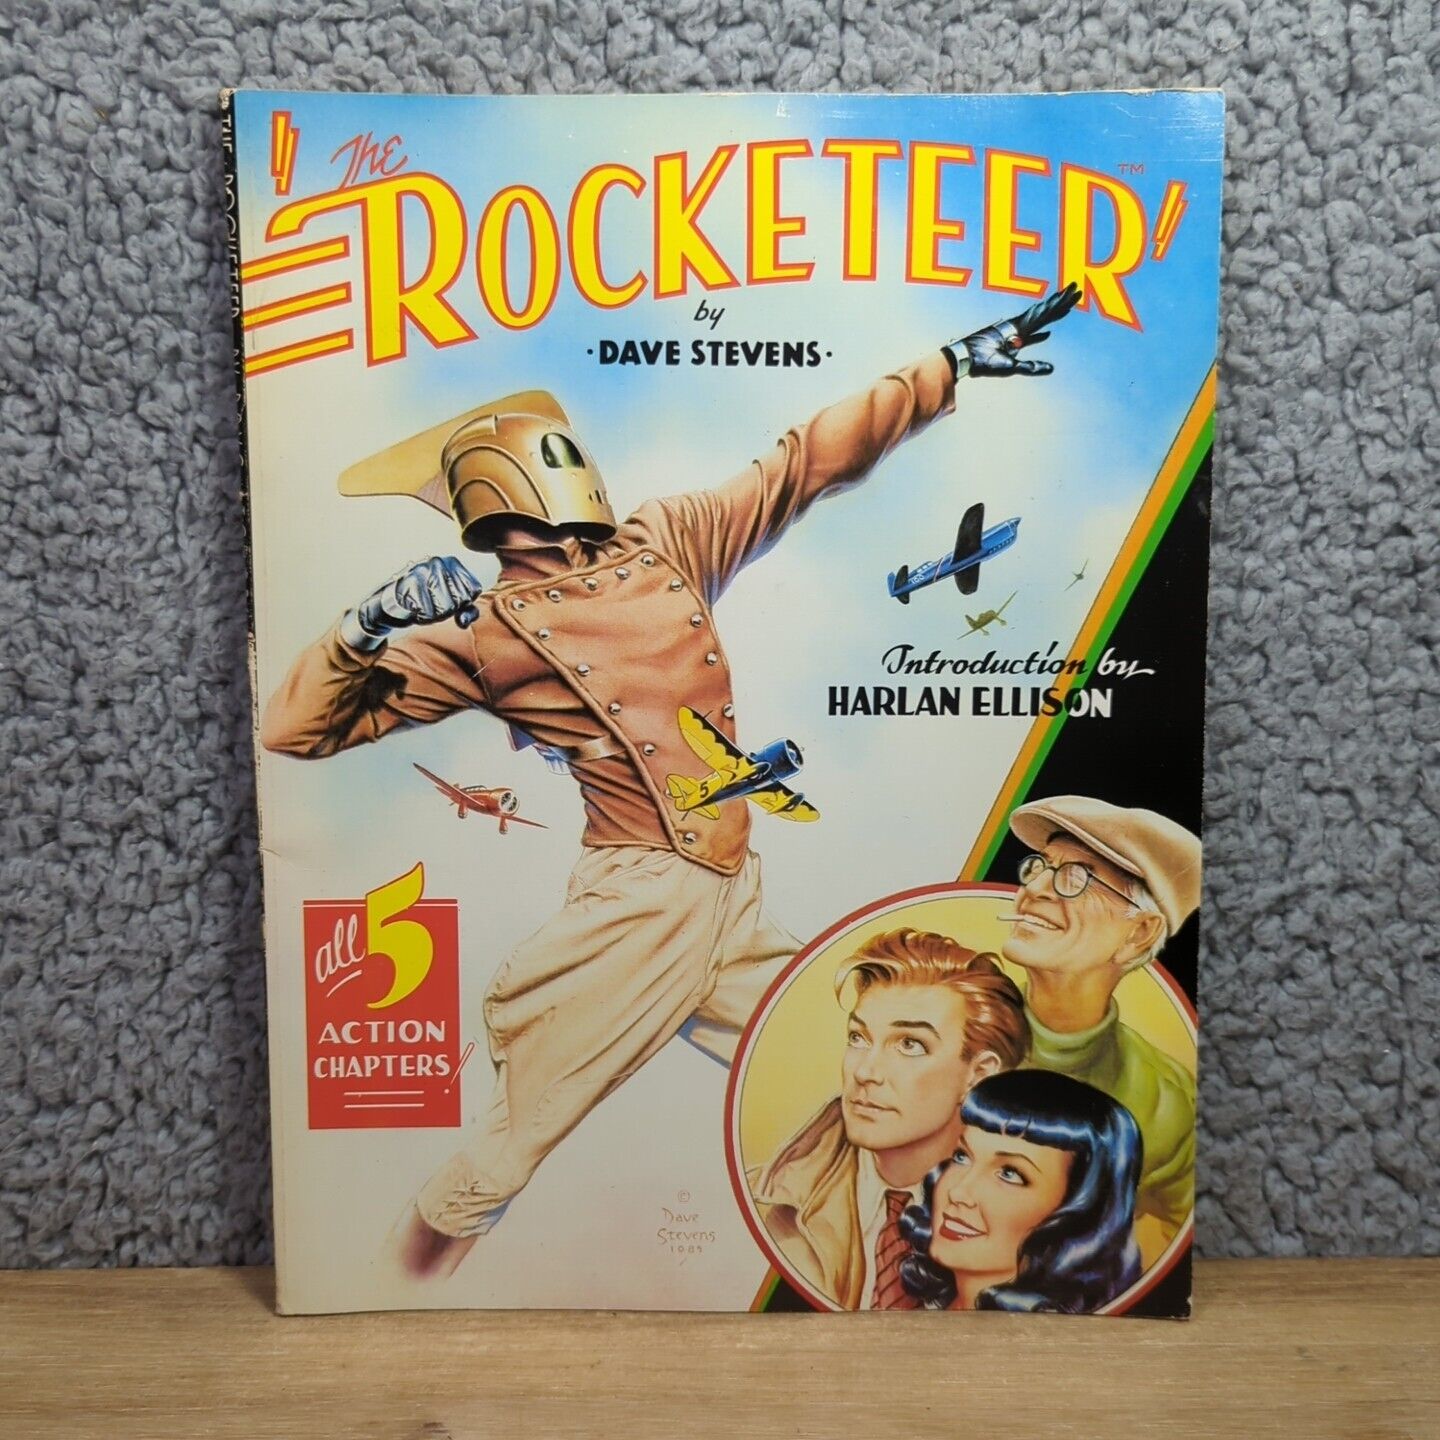 The ROCKETEER by DAVE STEVENS GRAPHIC NOVEL (1-5), 1985 